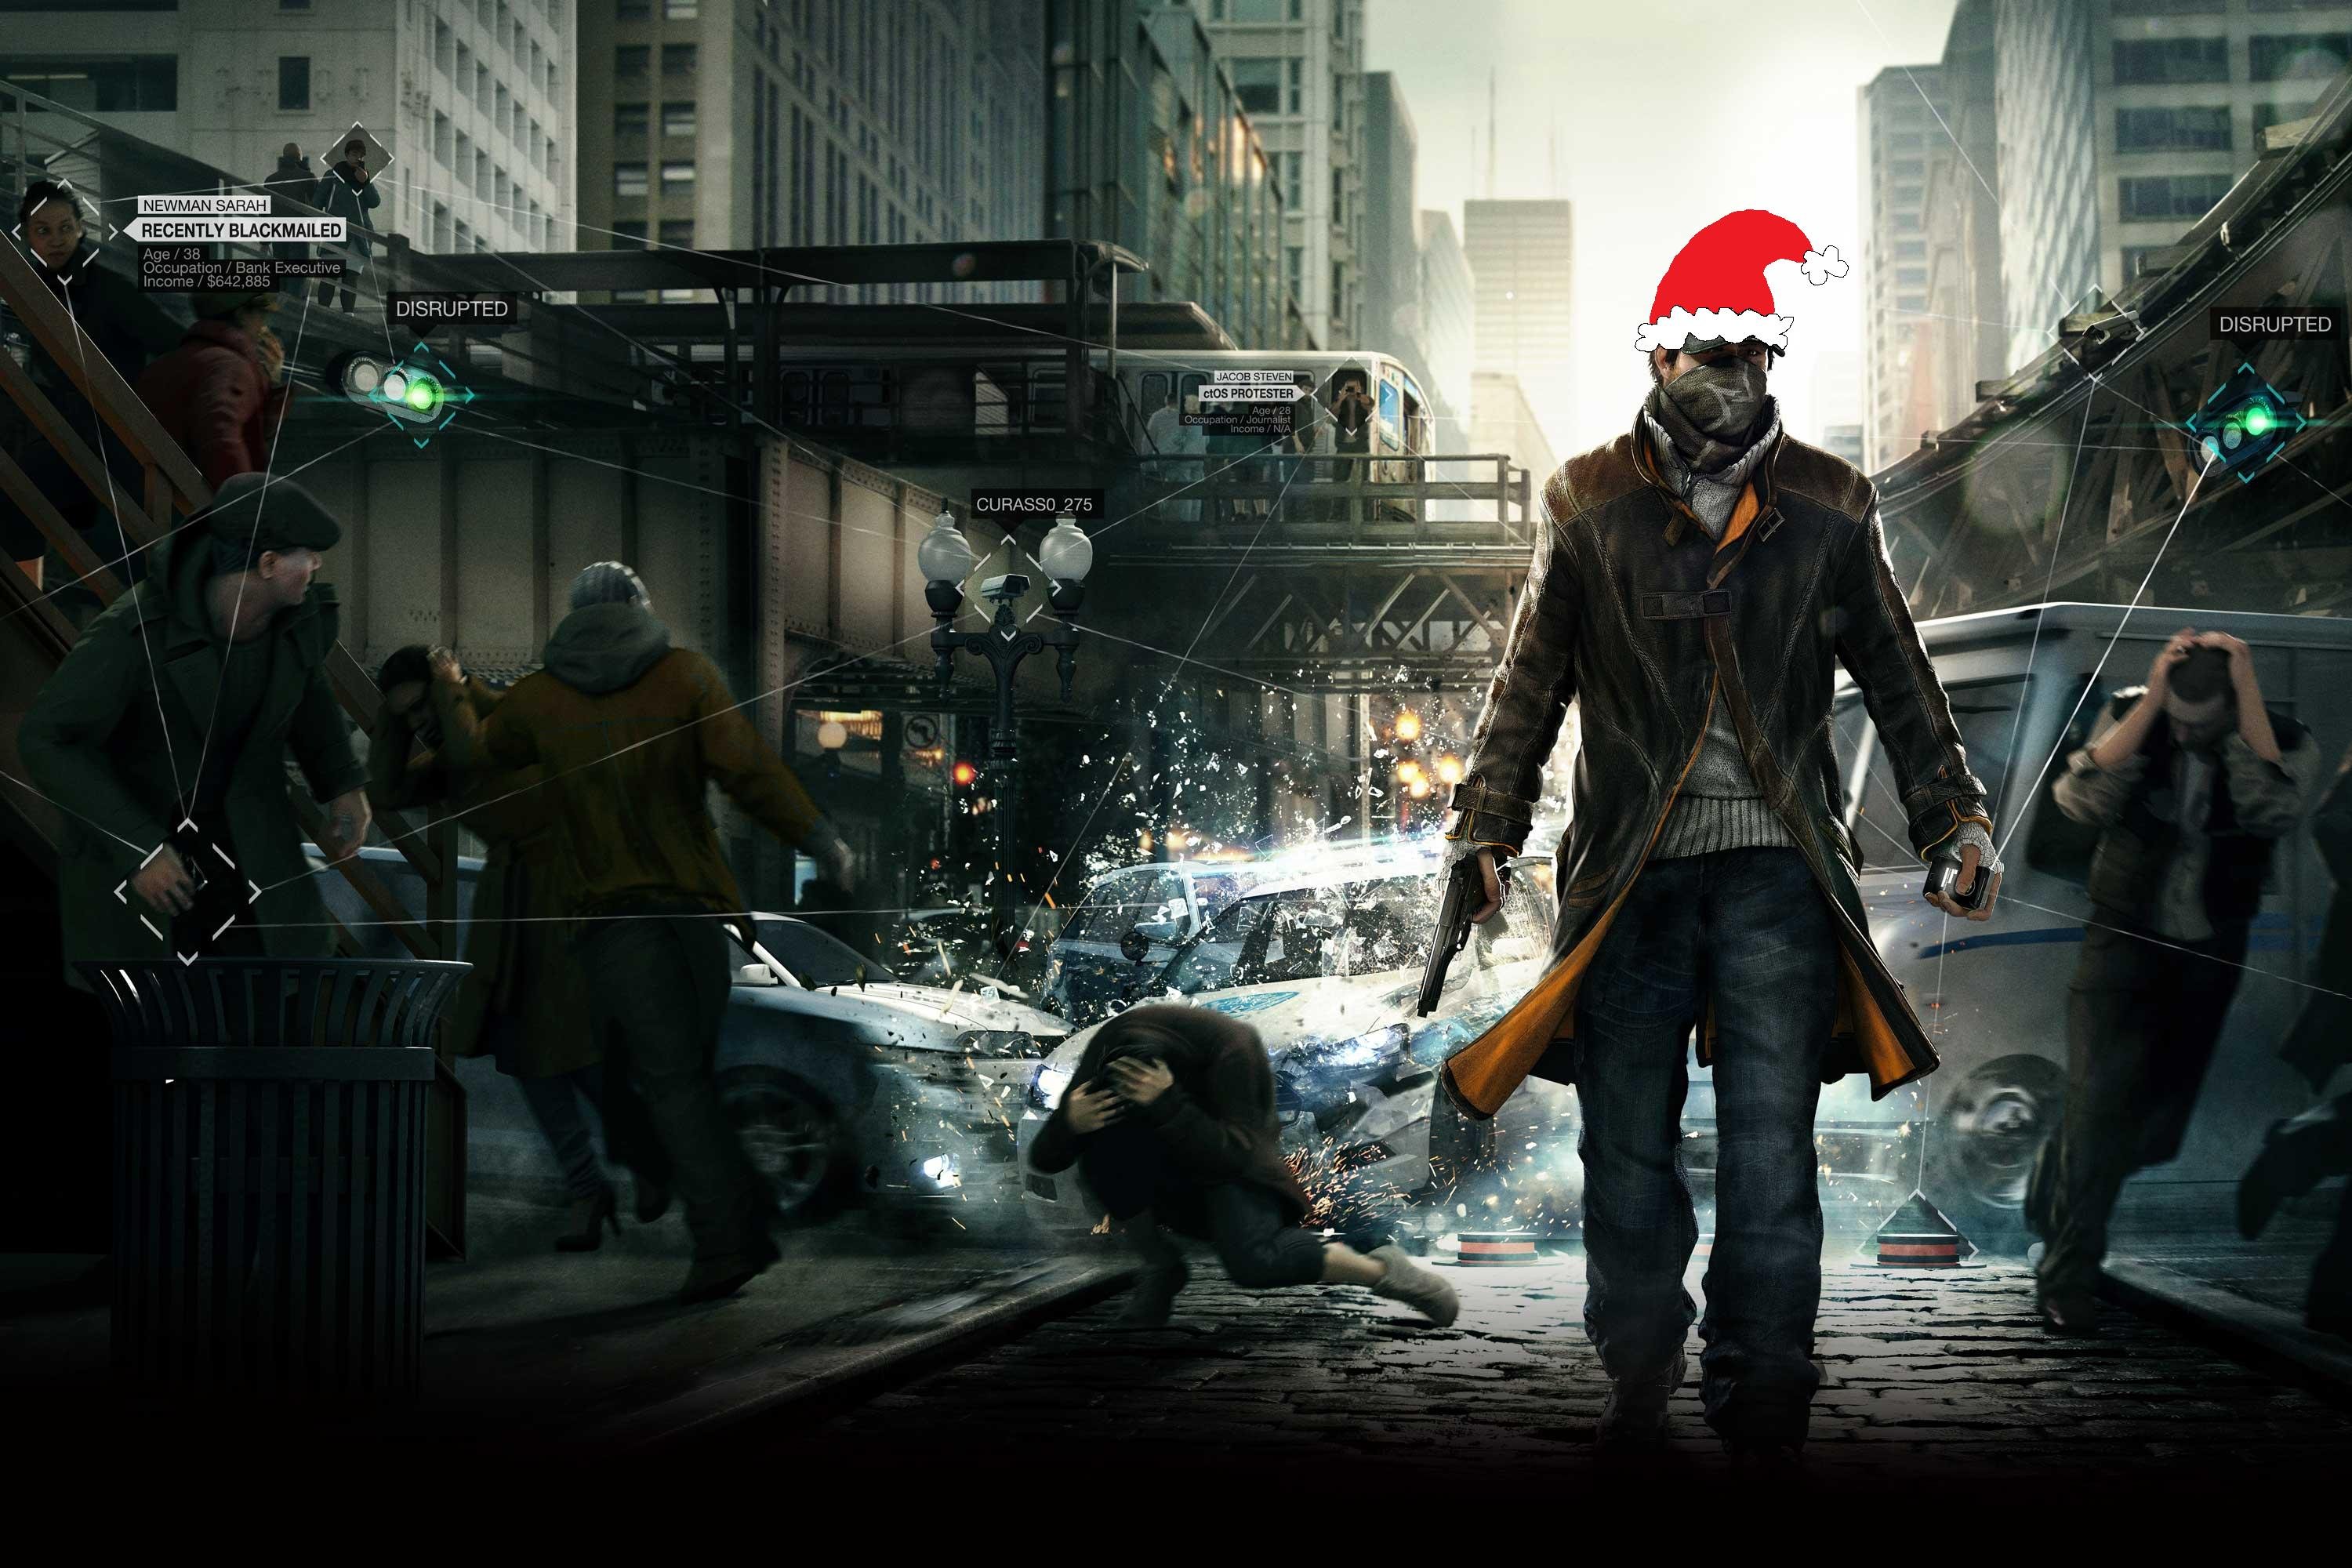 watch, Dogs, Futuristic, Cyberpunk, Shooter, Warrior, Action, Fighting, Sci fi, Poster, Christmas Wallpaper